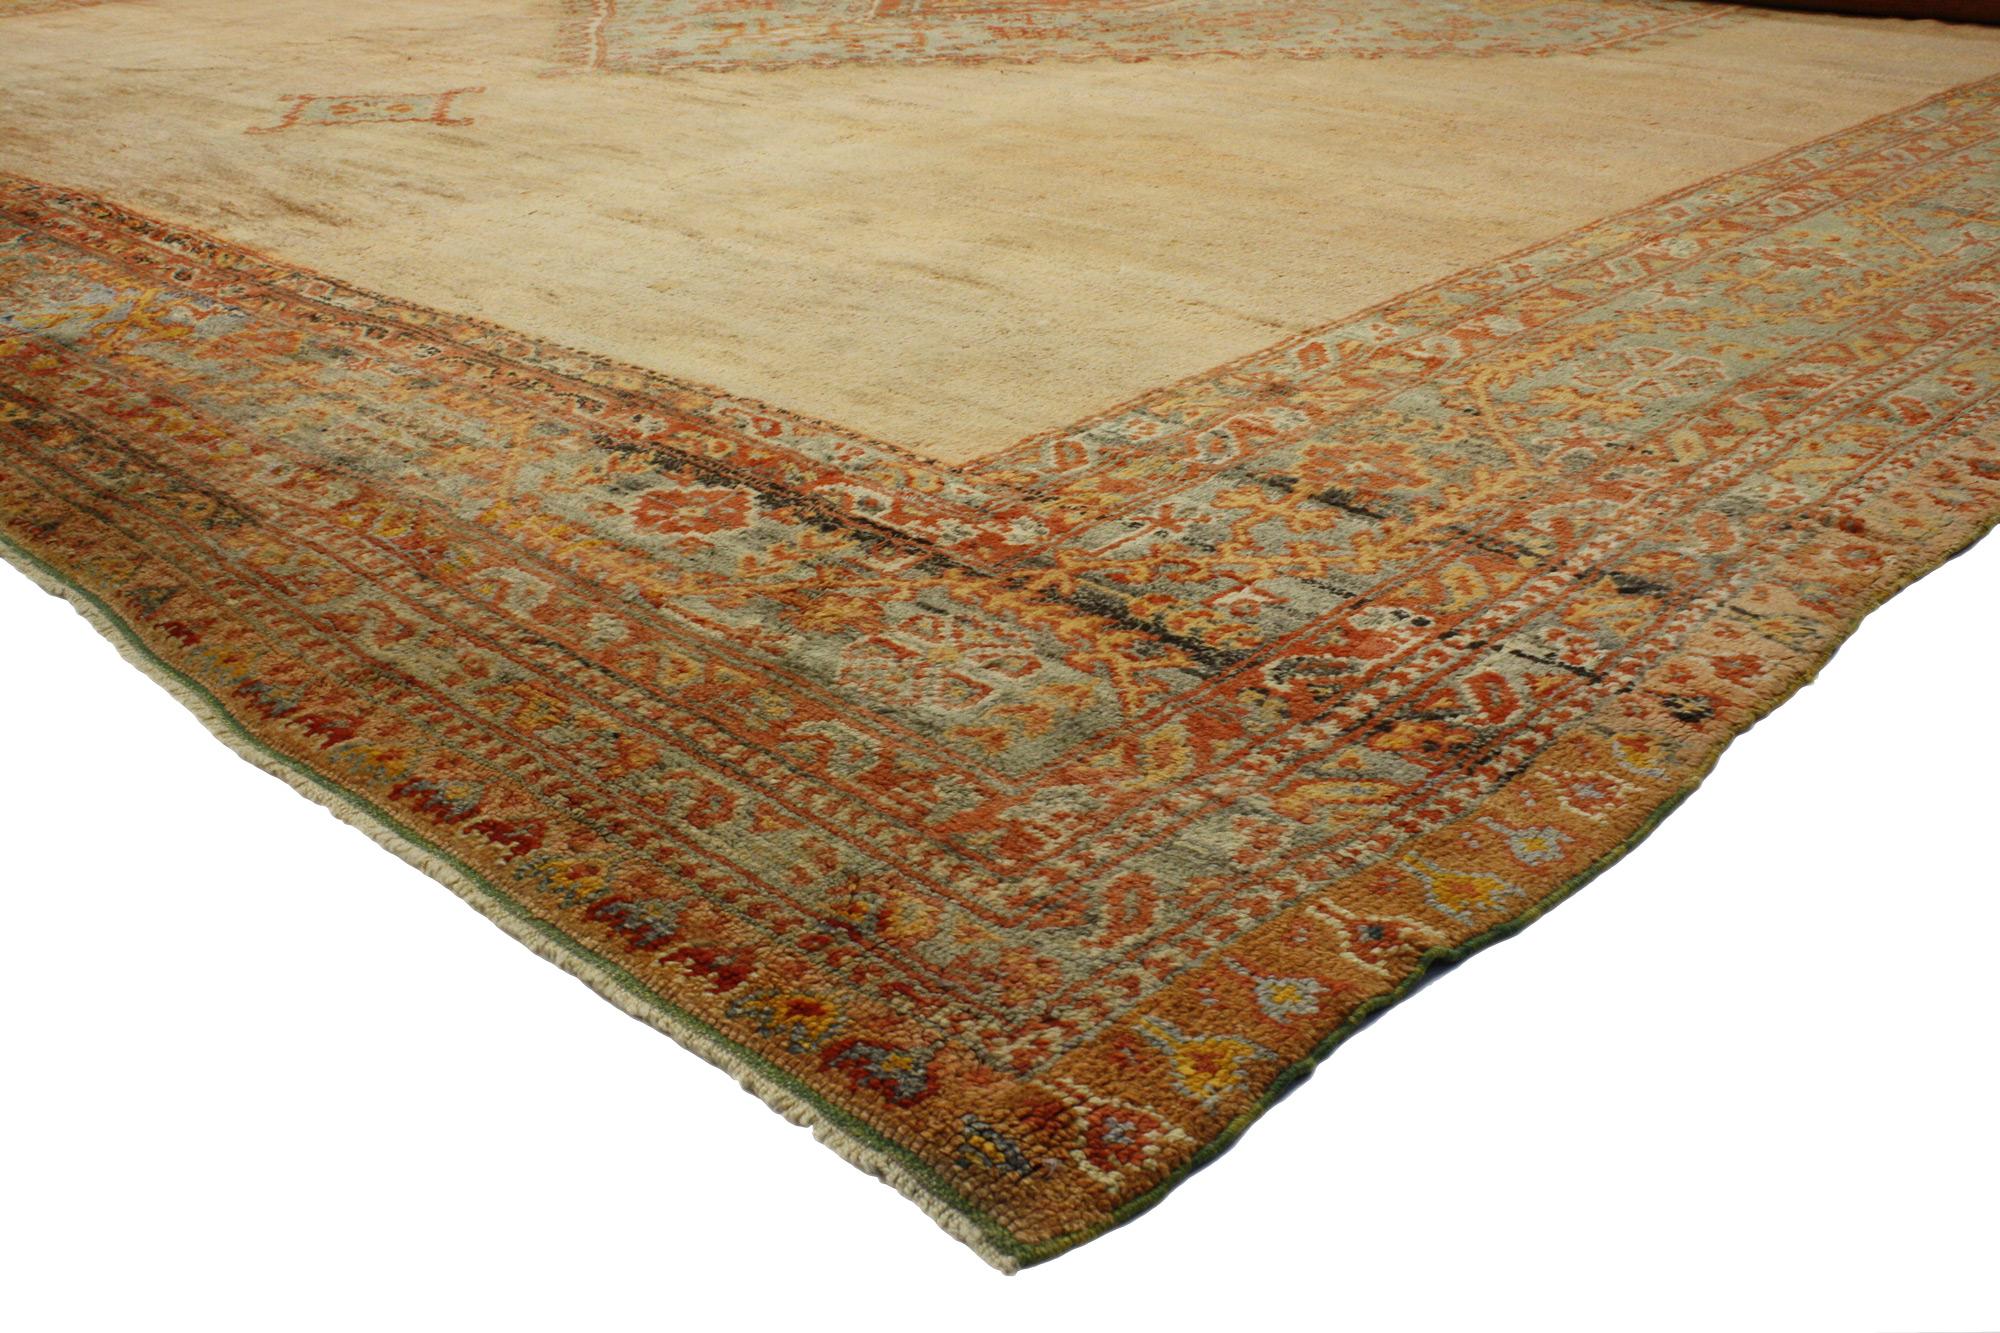 73104 Oversized Antique Turkish Oushak Rug, 17'10 x 20'07. 
Timeless appeal meets Mediterranean style in this hand knotted wool oversized antique Turkish Oushak rug. The ornate details and sunbaked earthy hues woven into this piece work together